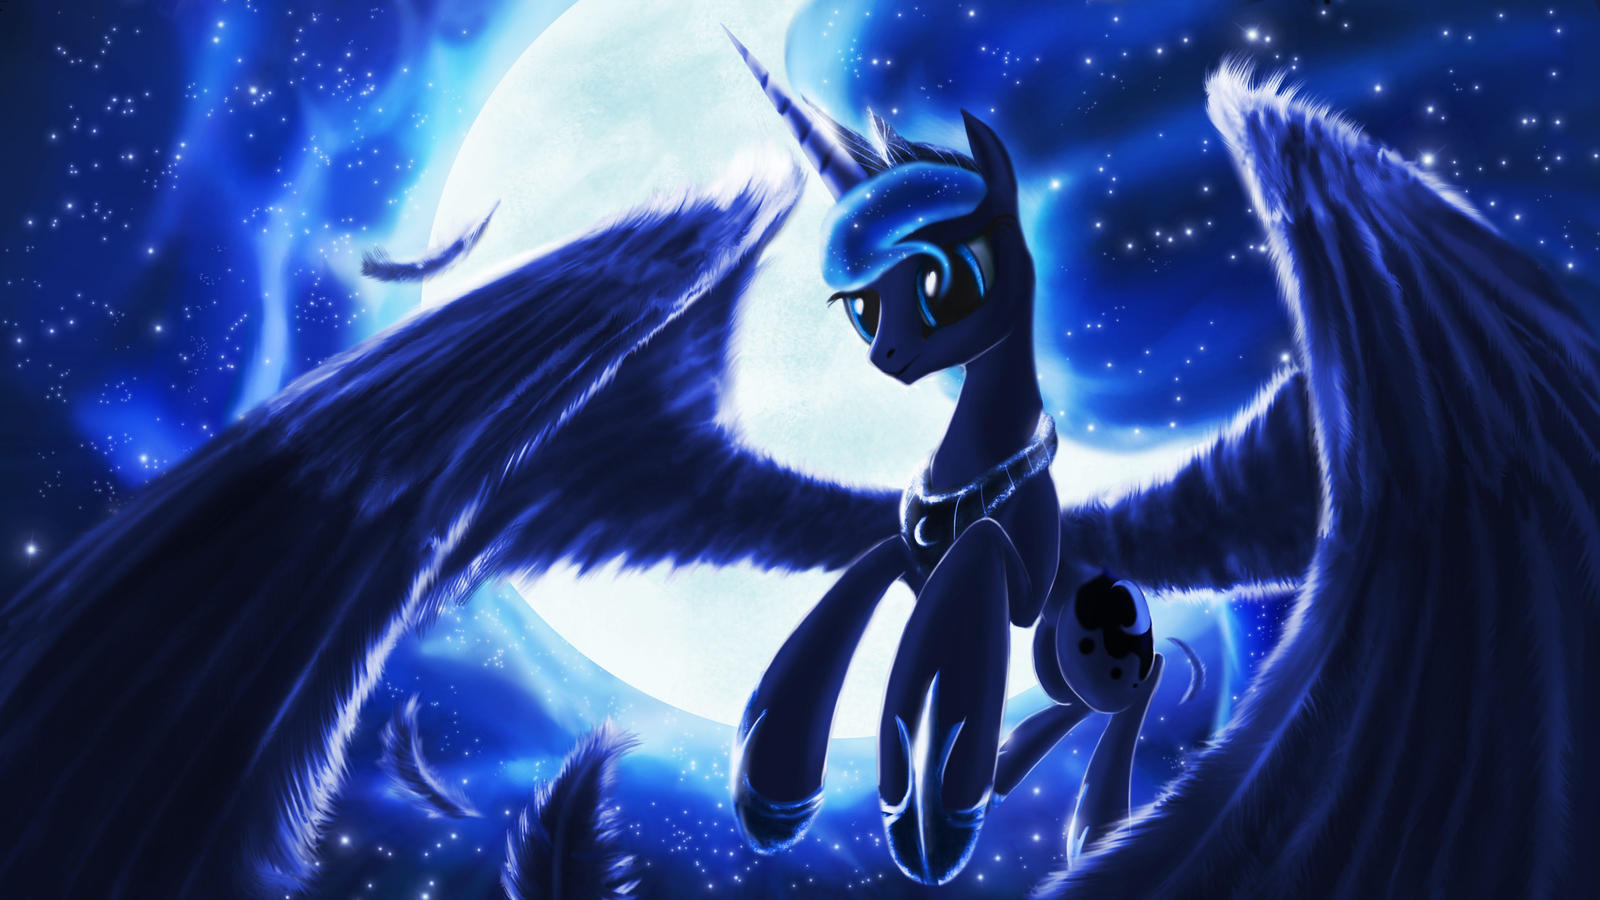 princess_of_the_night_by_oblomos-d5wi57y